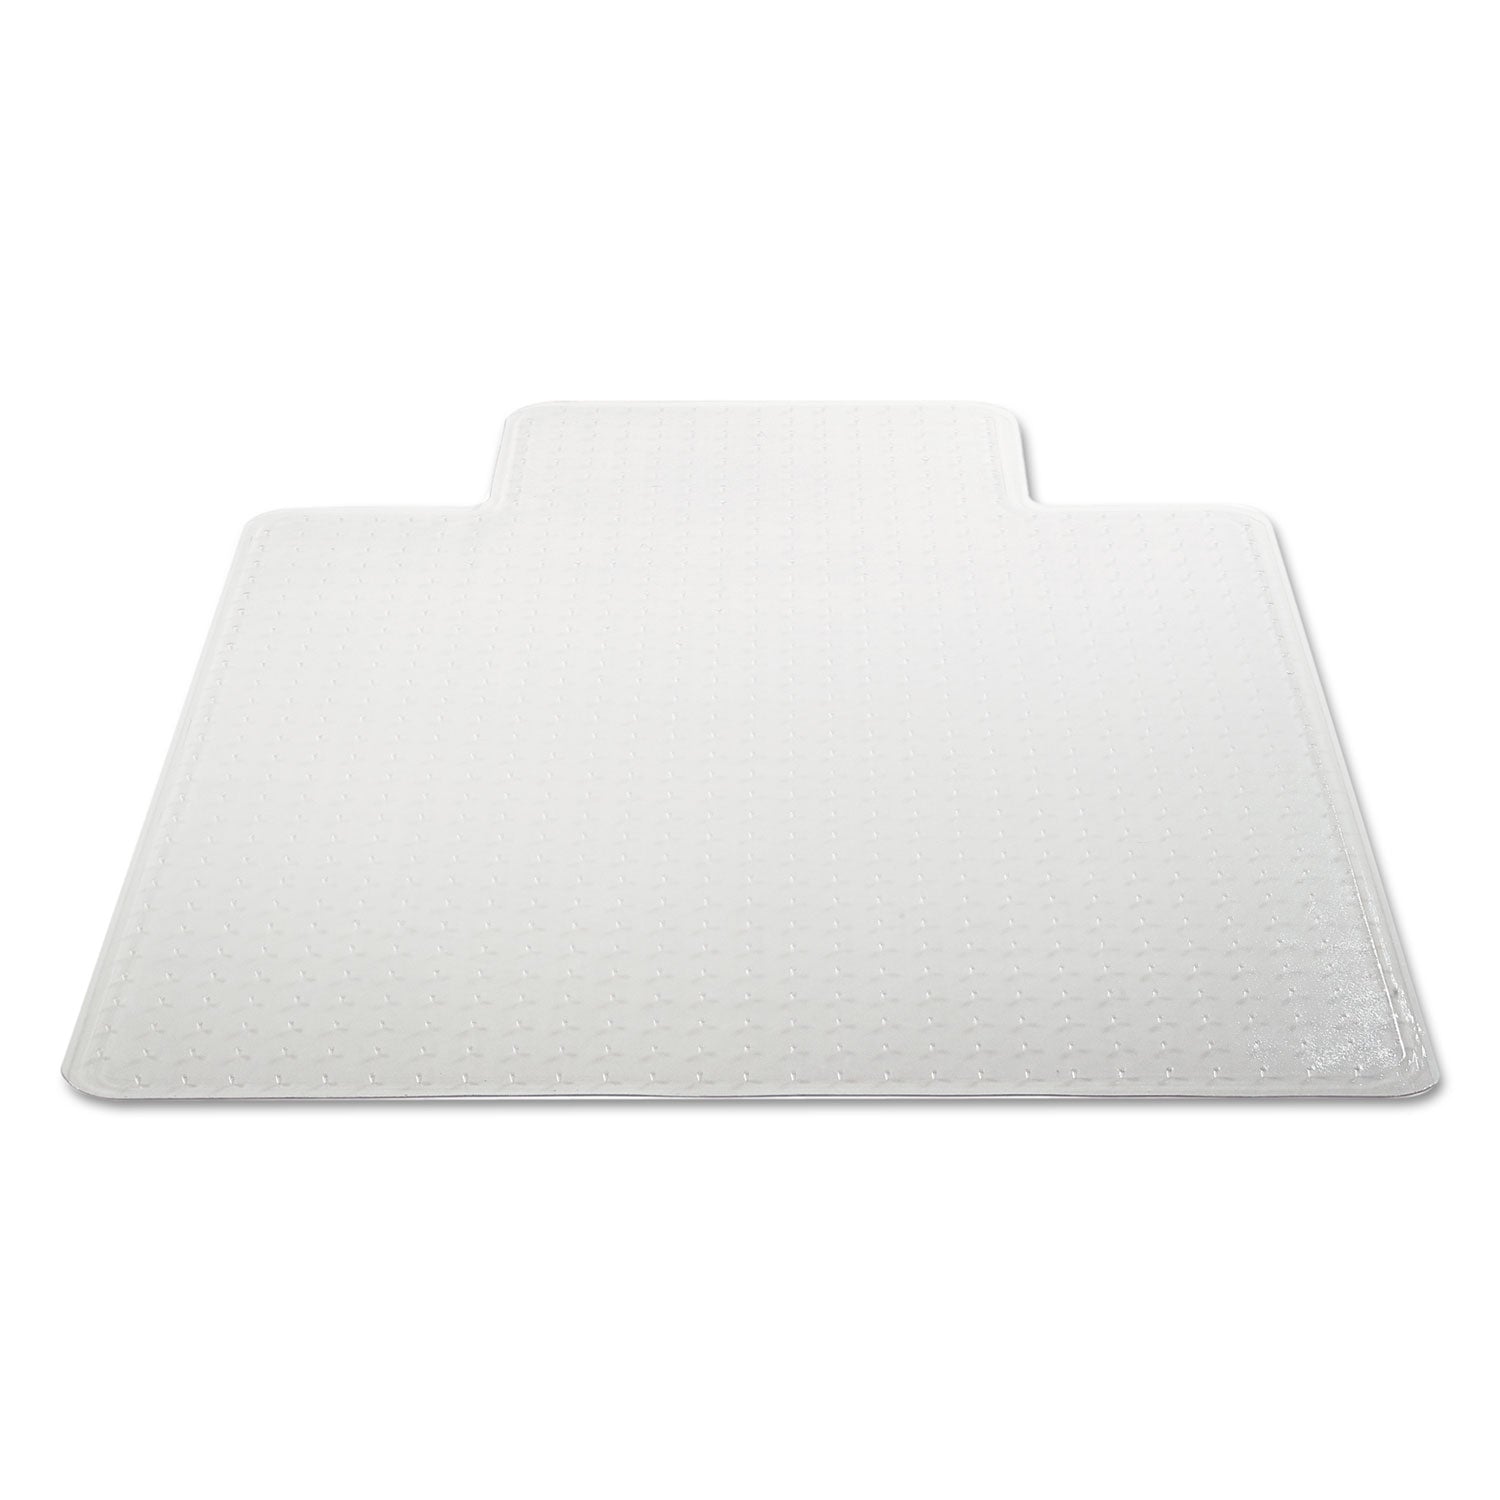 moderate-use-studded-chair-mat-for-low-pile-carpet-36-x-48-lipped-clear_alemat3648clpl - 6